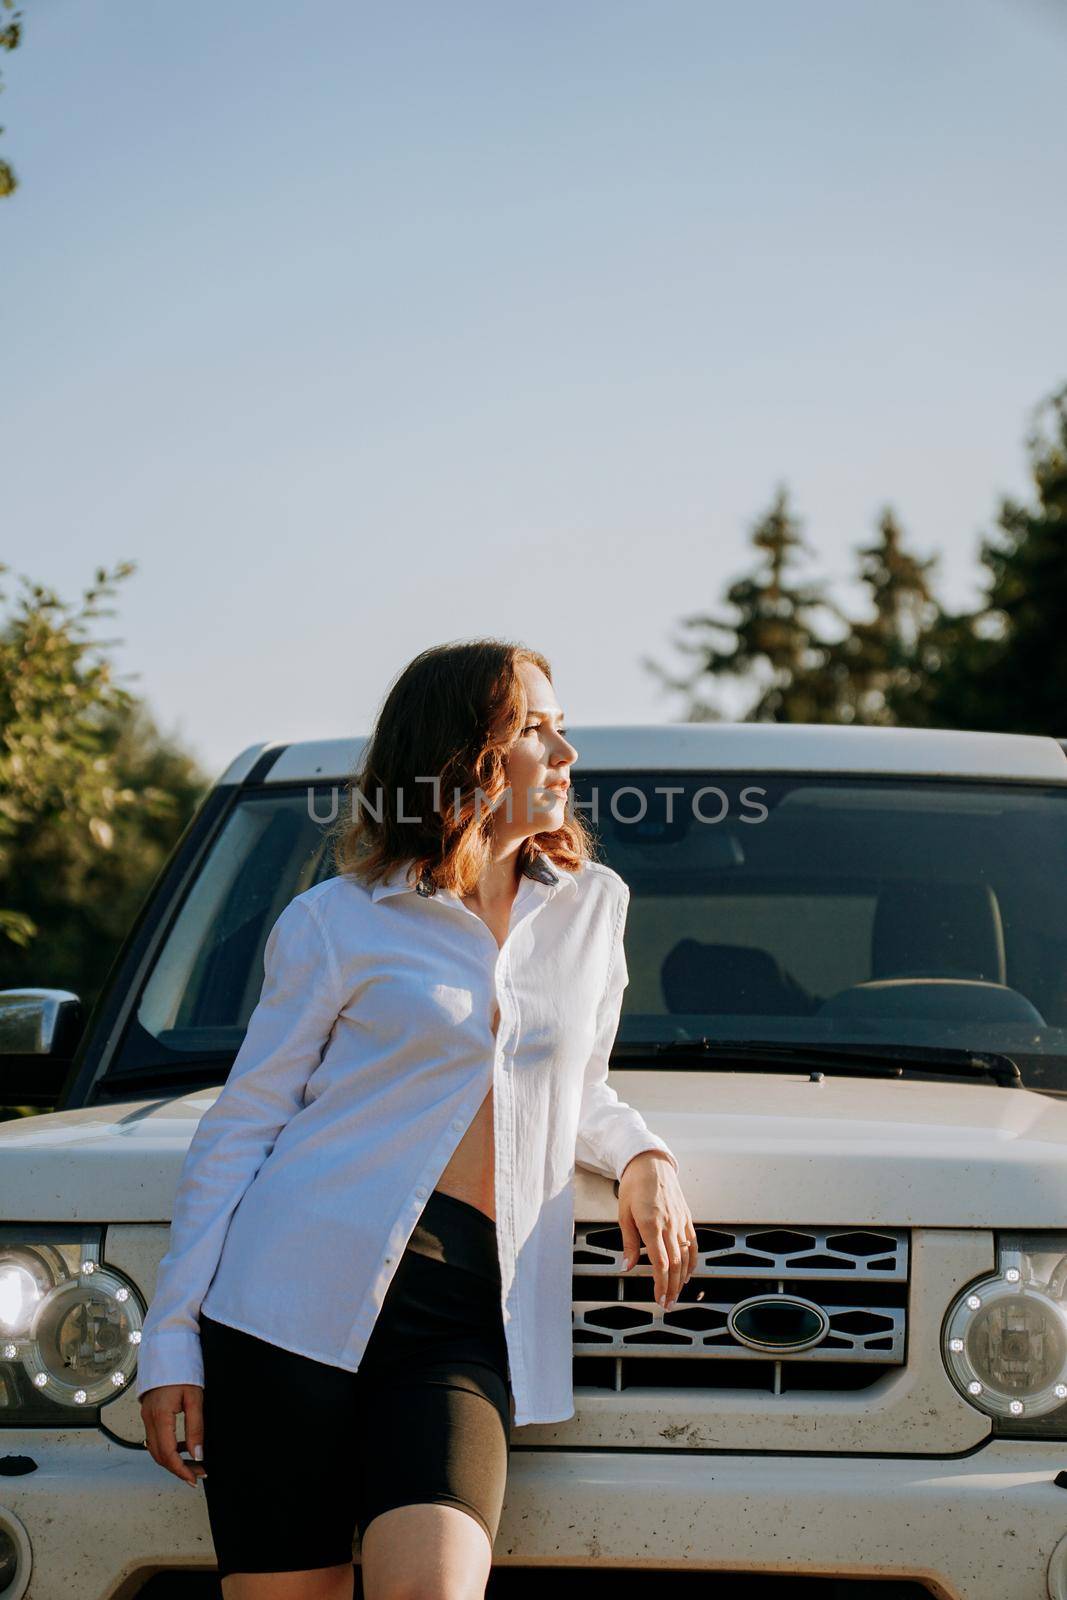 A woman in a white shirt next to a white car on the road by natali_brill